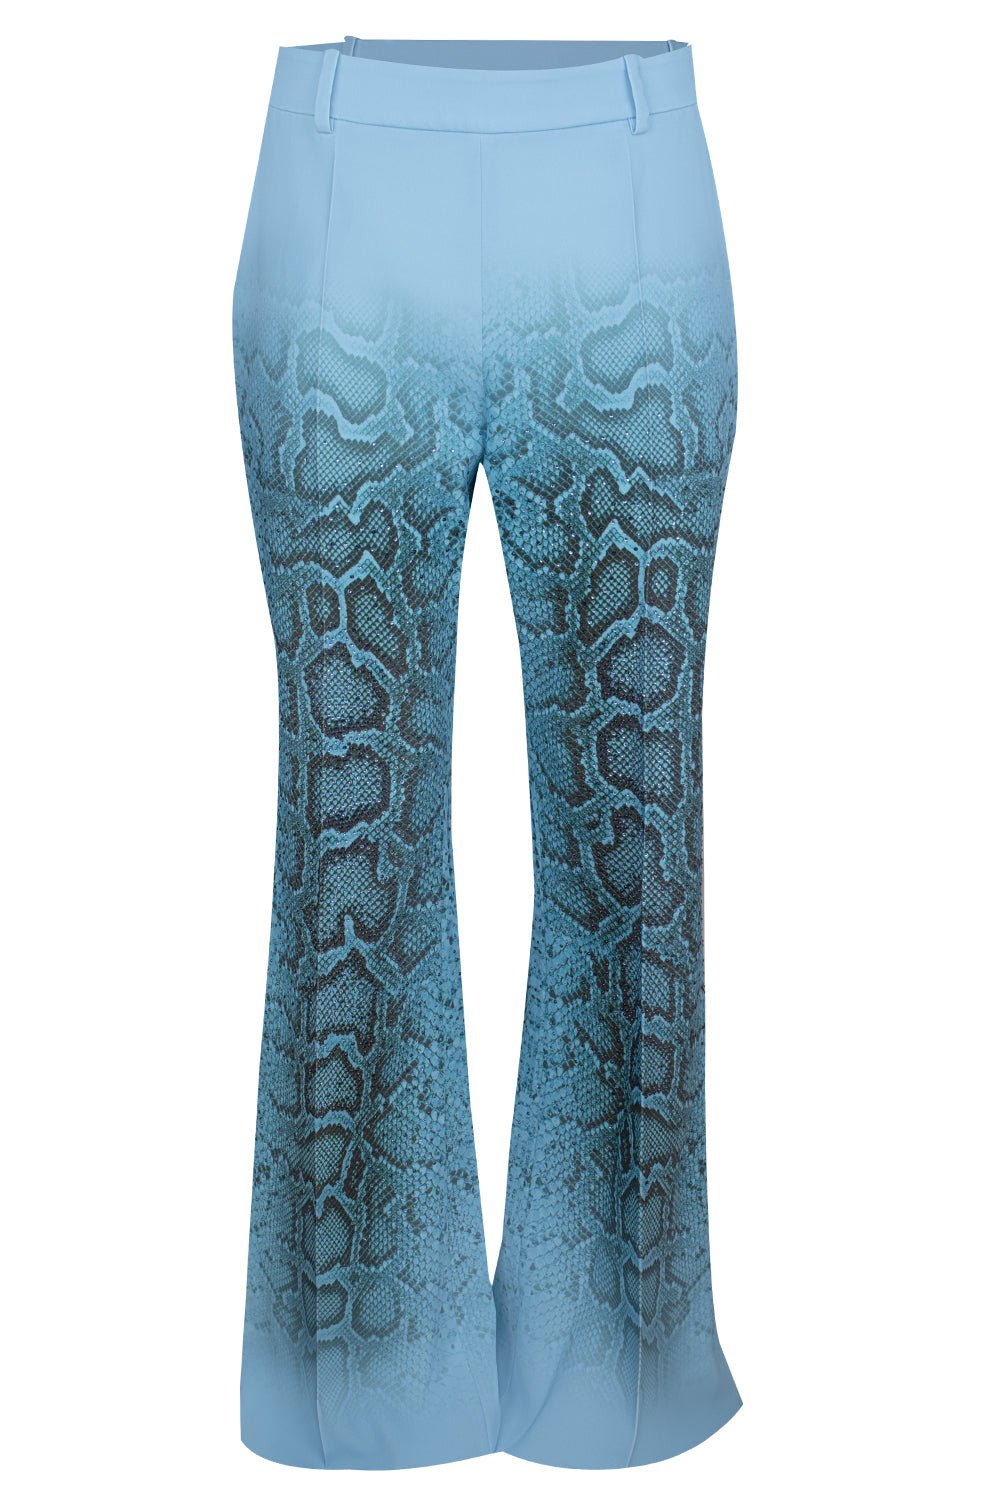 SNAKE PRINT TROUSERS - Collection - Trousers - Collection - Woman